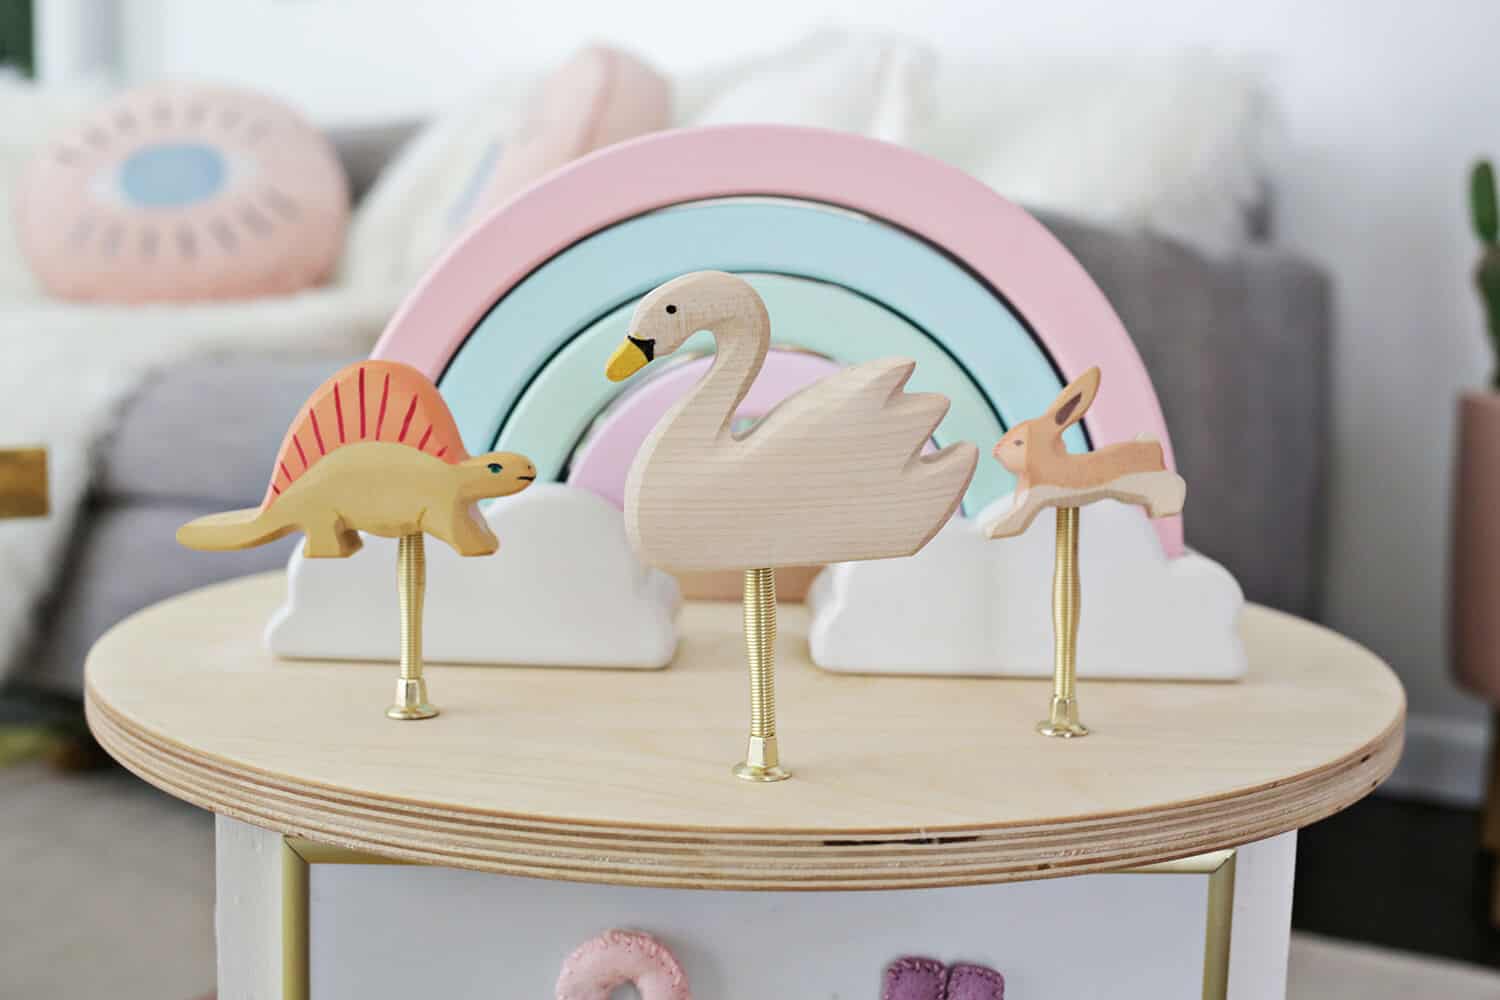 wooden dinosaur, wooden swan, wooden rabbit, and wooden rainbow on top of toddle activity center